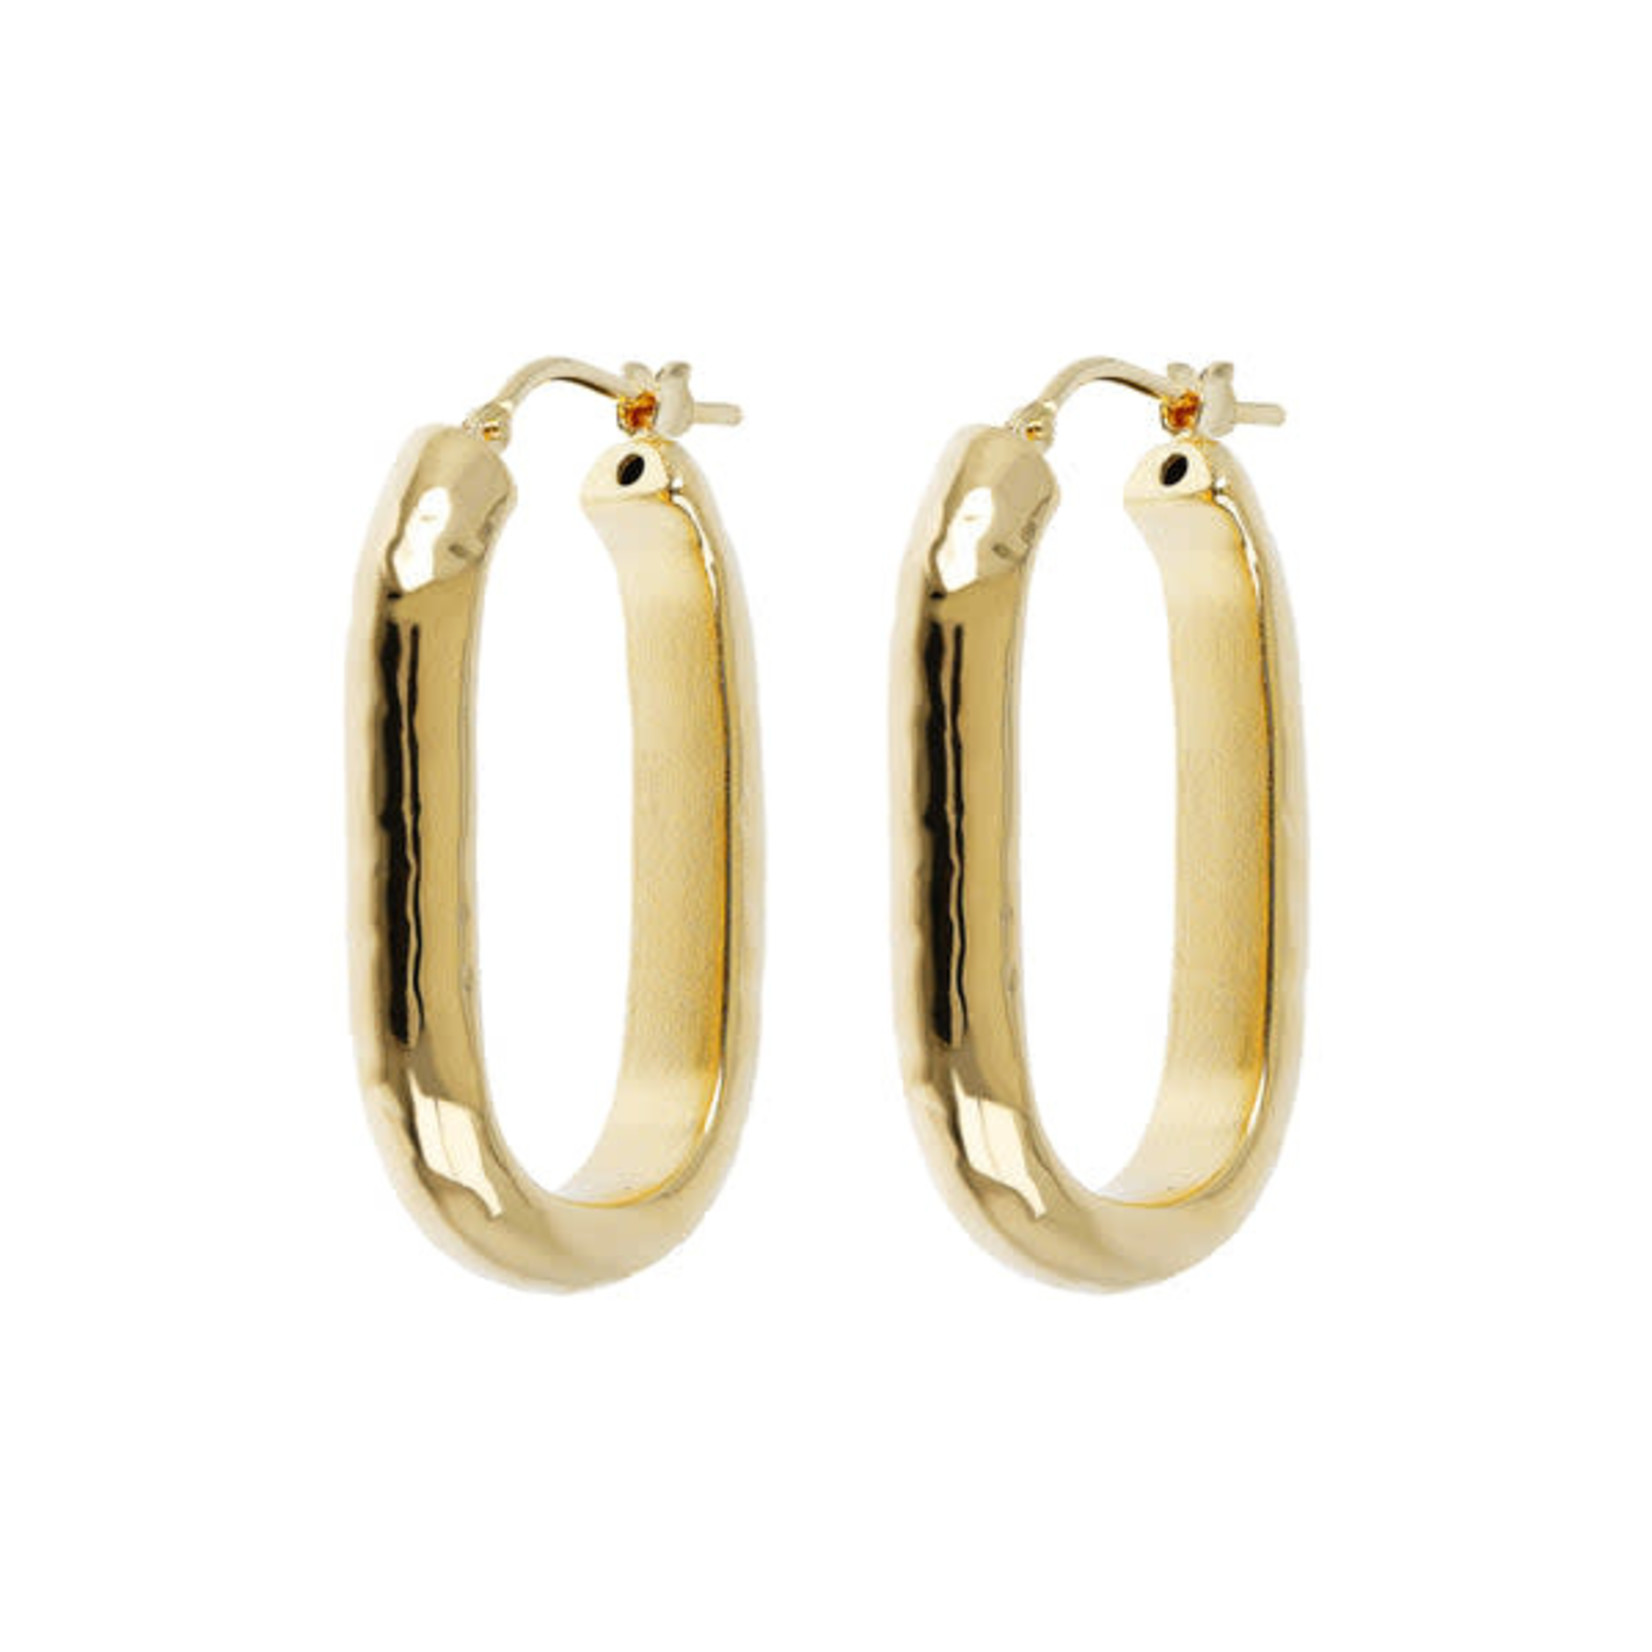 ETRUSCA ETRUSCA Small Elongated Hoops